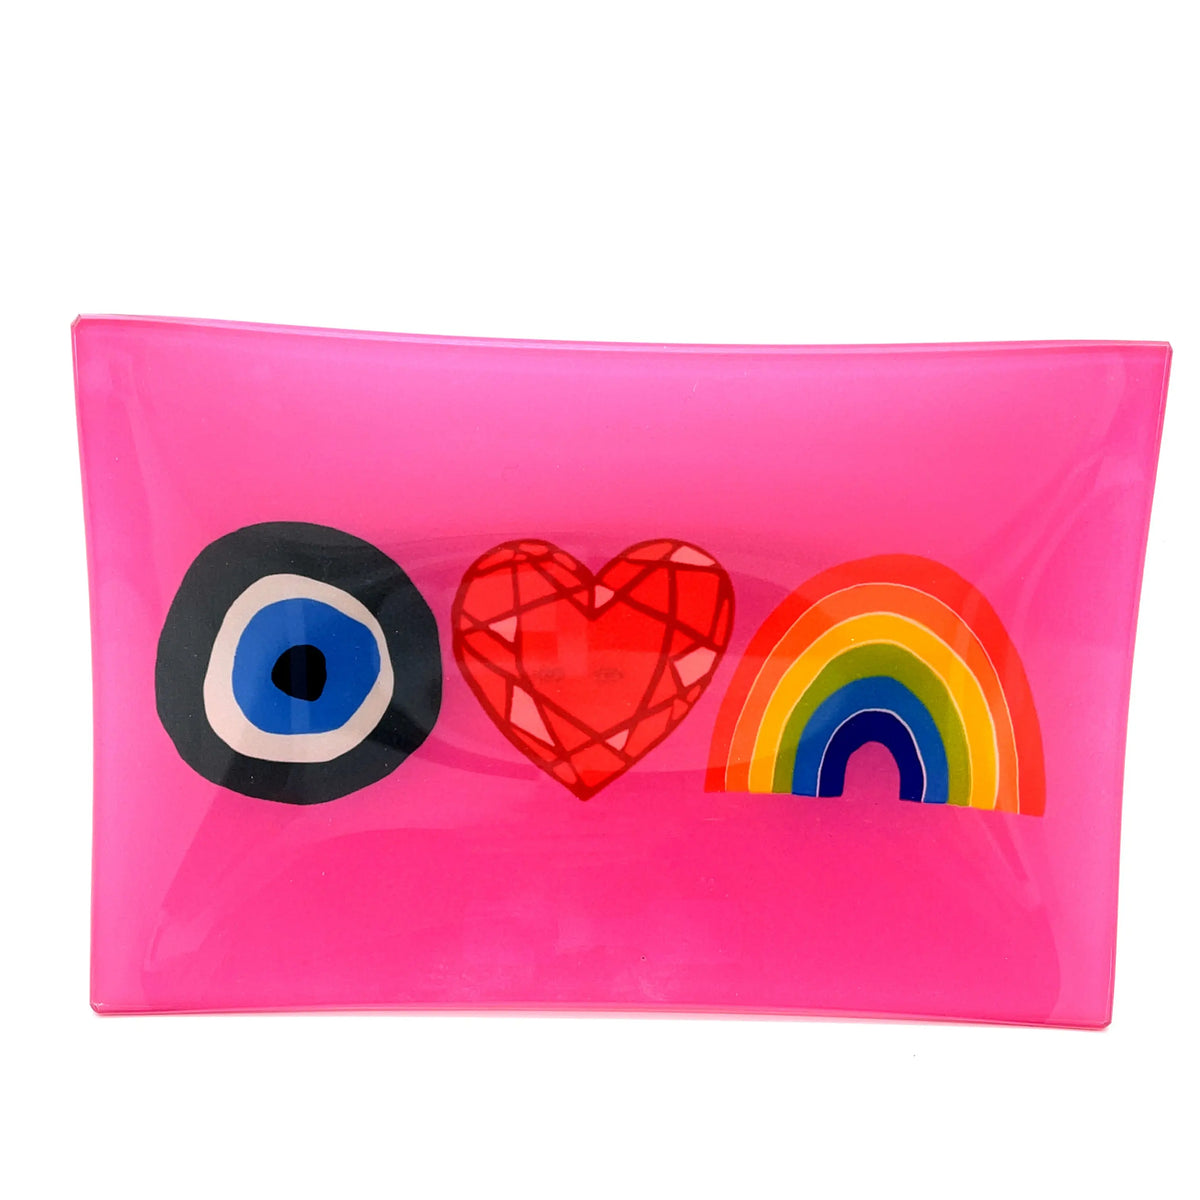 The rainbow dish gives you some much needed lucky and protection. It also holds your special treasures.  This glass handmade jewelry tray is great alone or paired with your favorite jewels.  Made by Lisa Bayer and size 6x6.  The rainbow tray has a evil eye, rainbow and a heart.